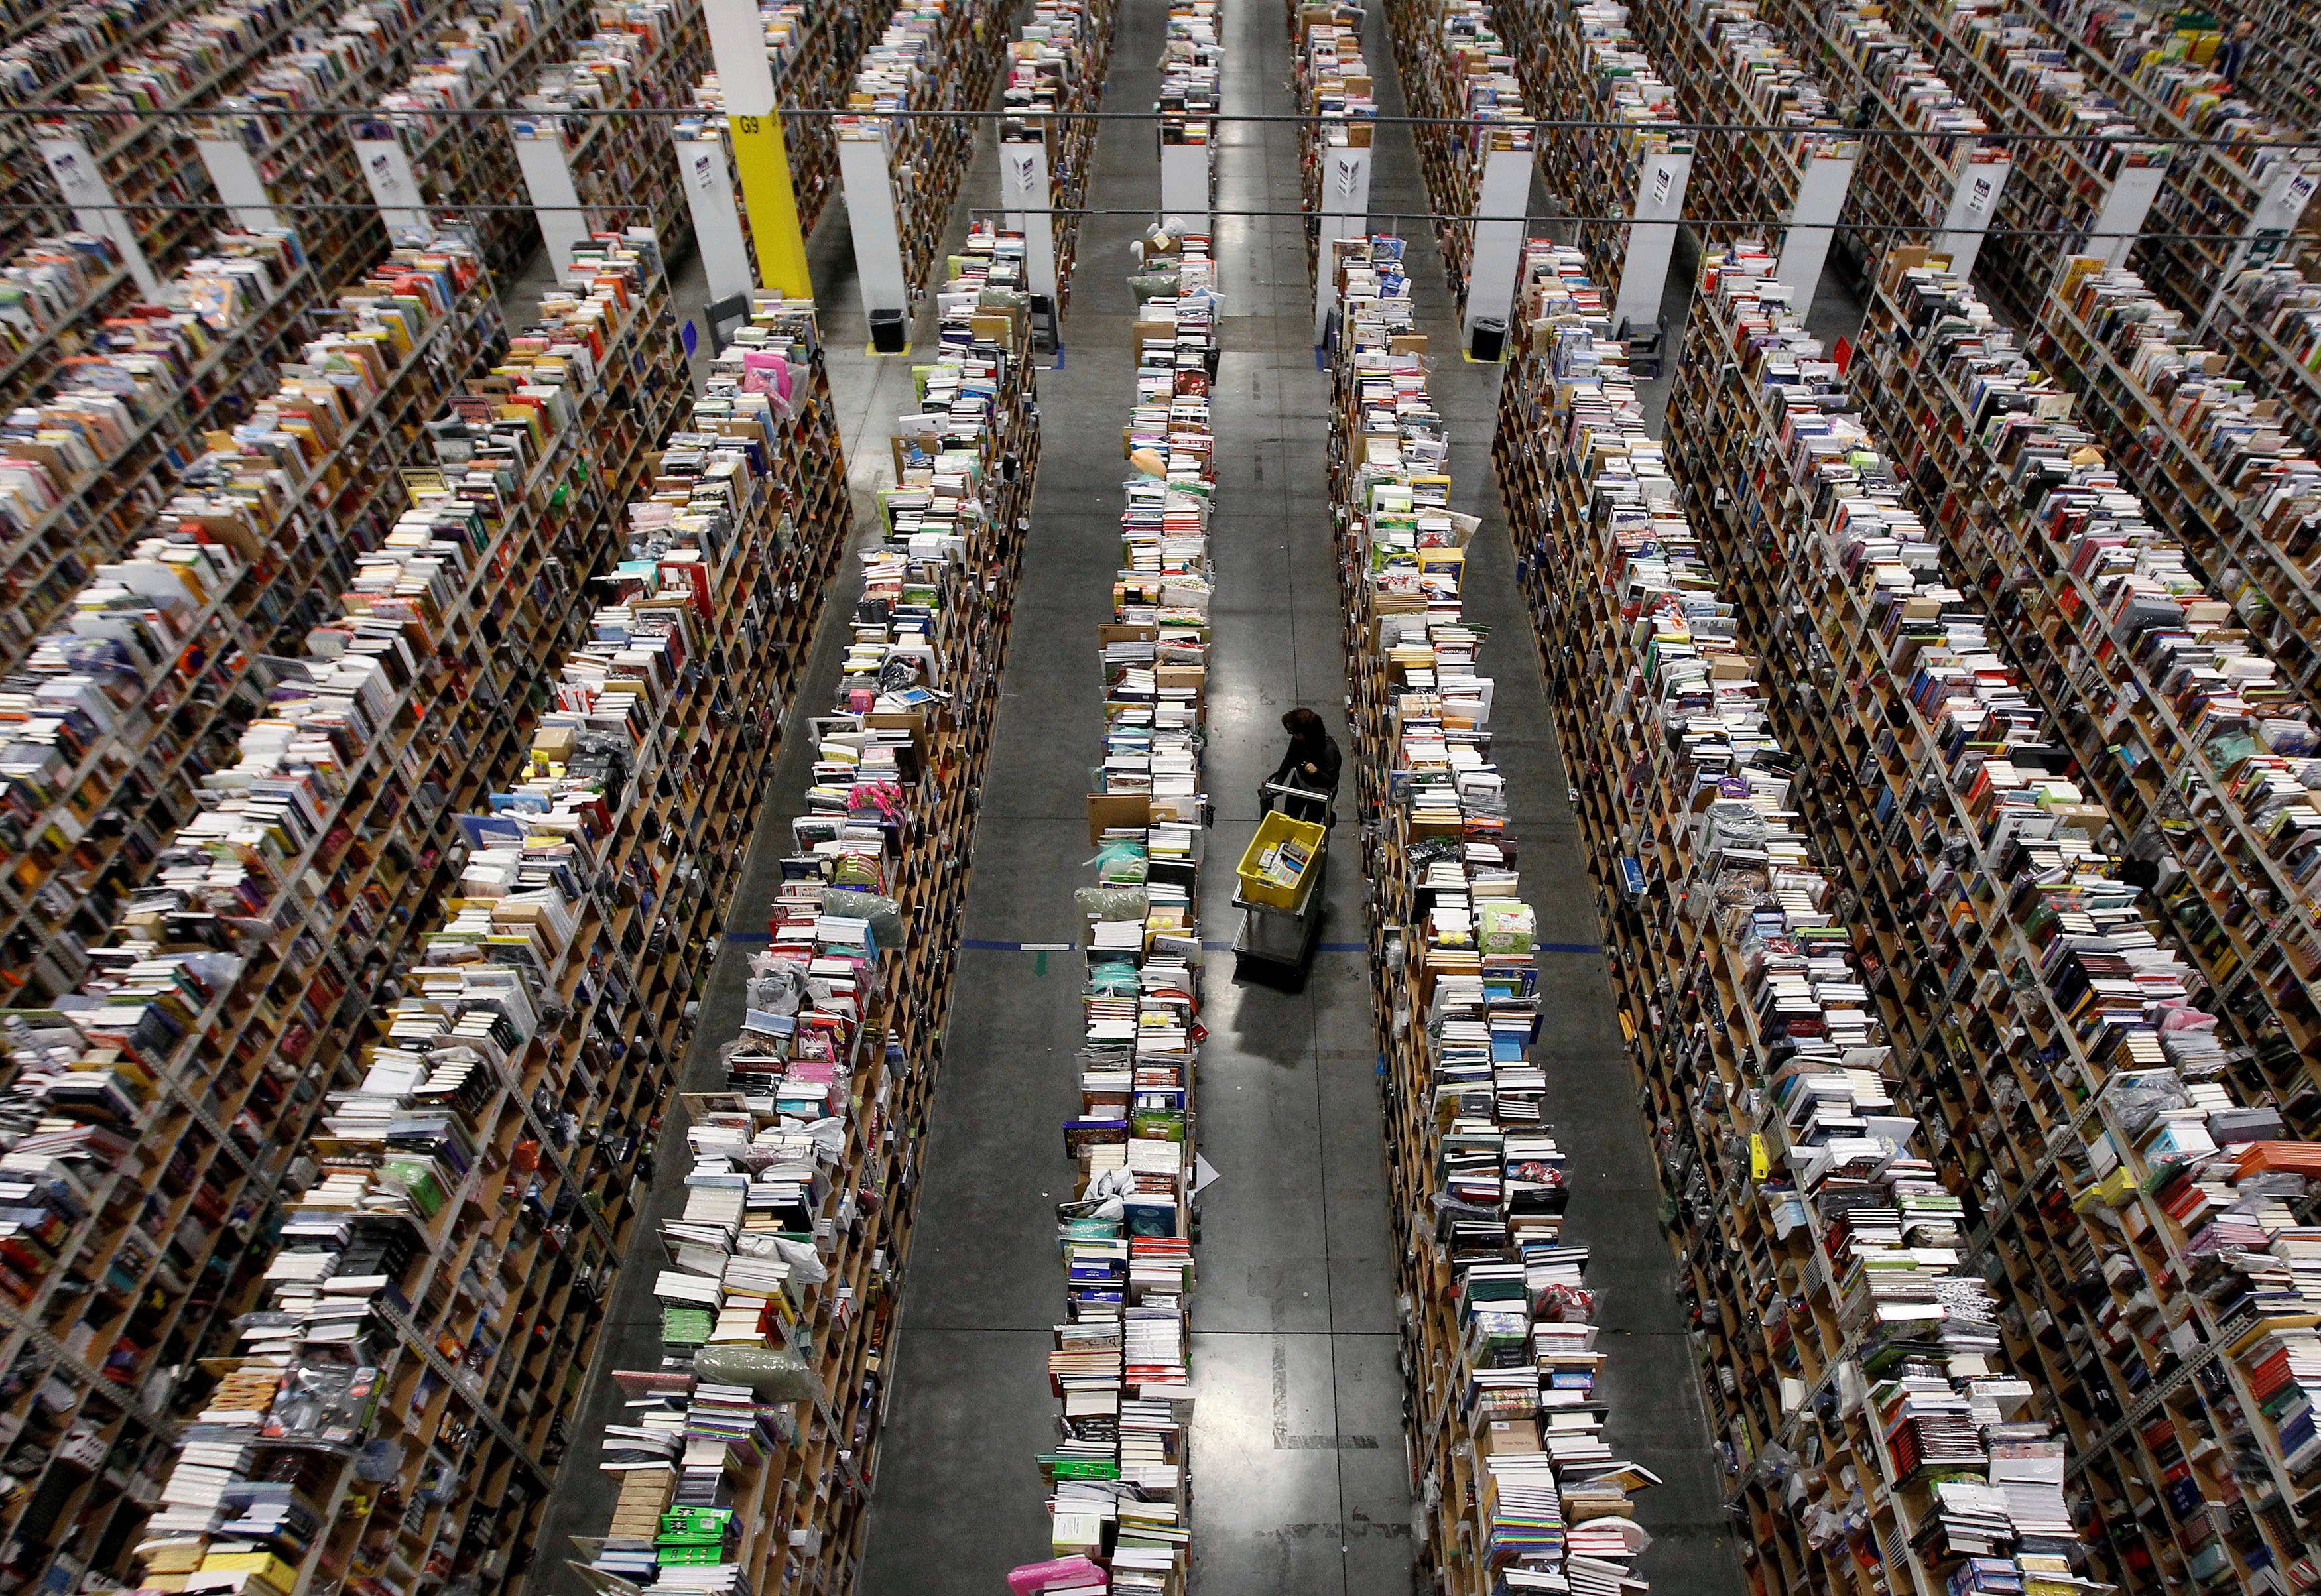 http://www.ibtimes.com/do-you-have-pay-sales-tax-selling-online-amazon-sellers-face-nearly-2-billion-missed-2512663